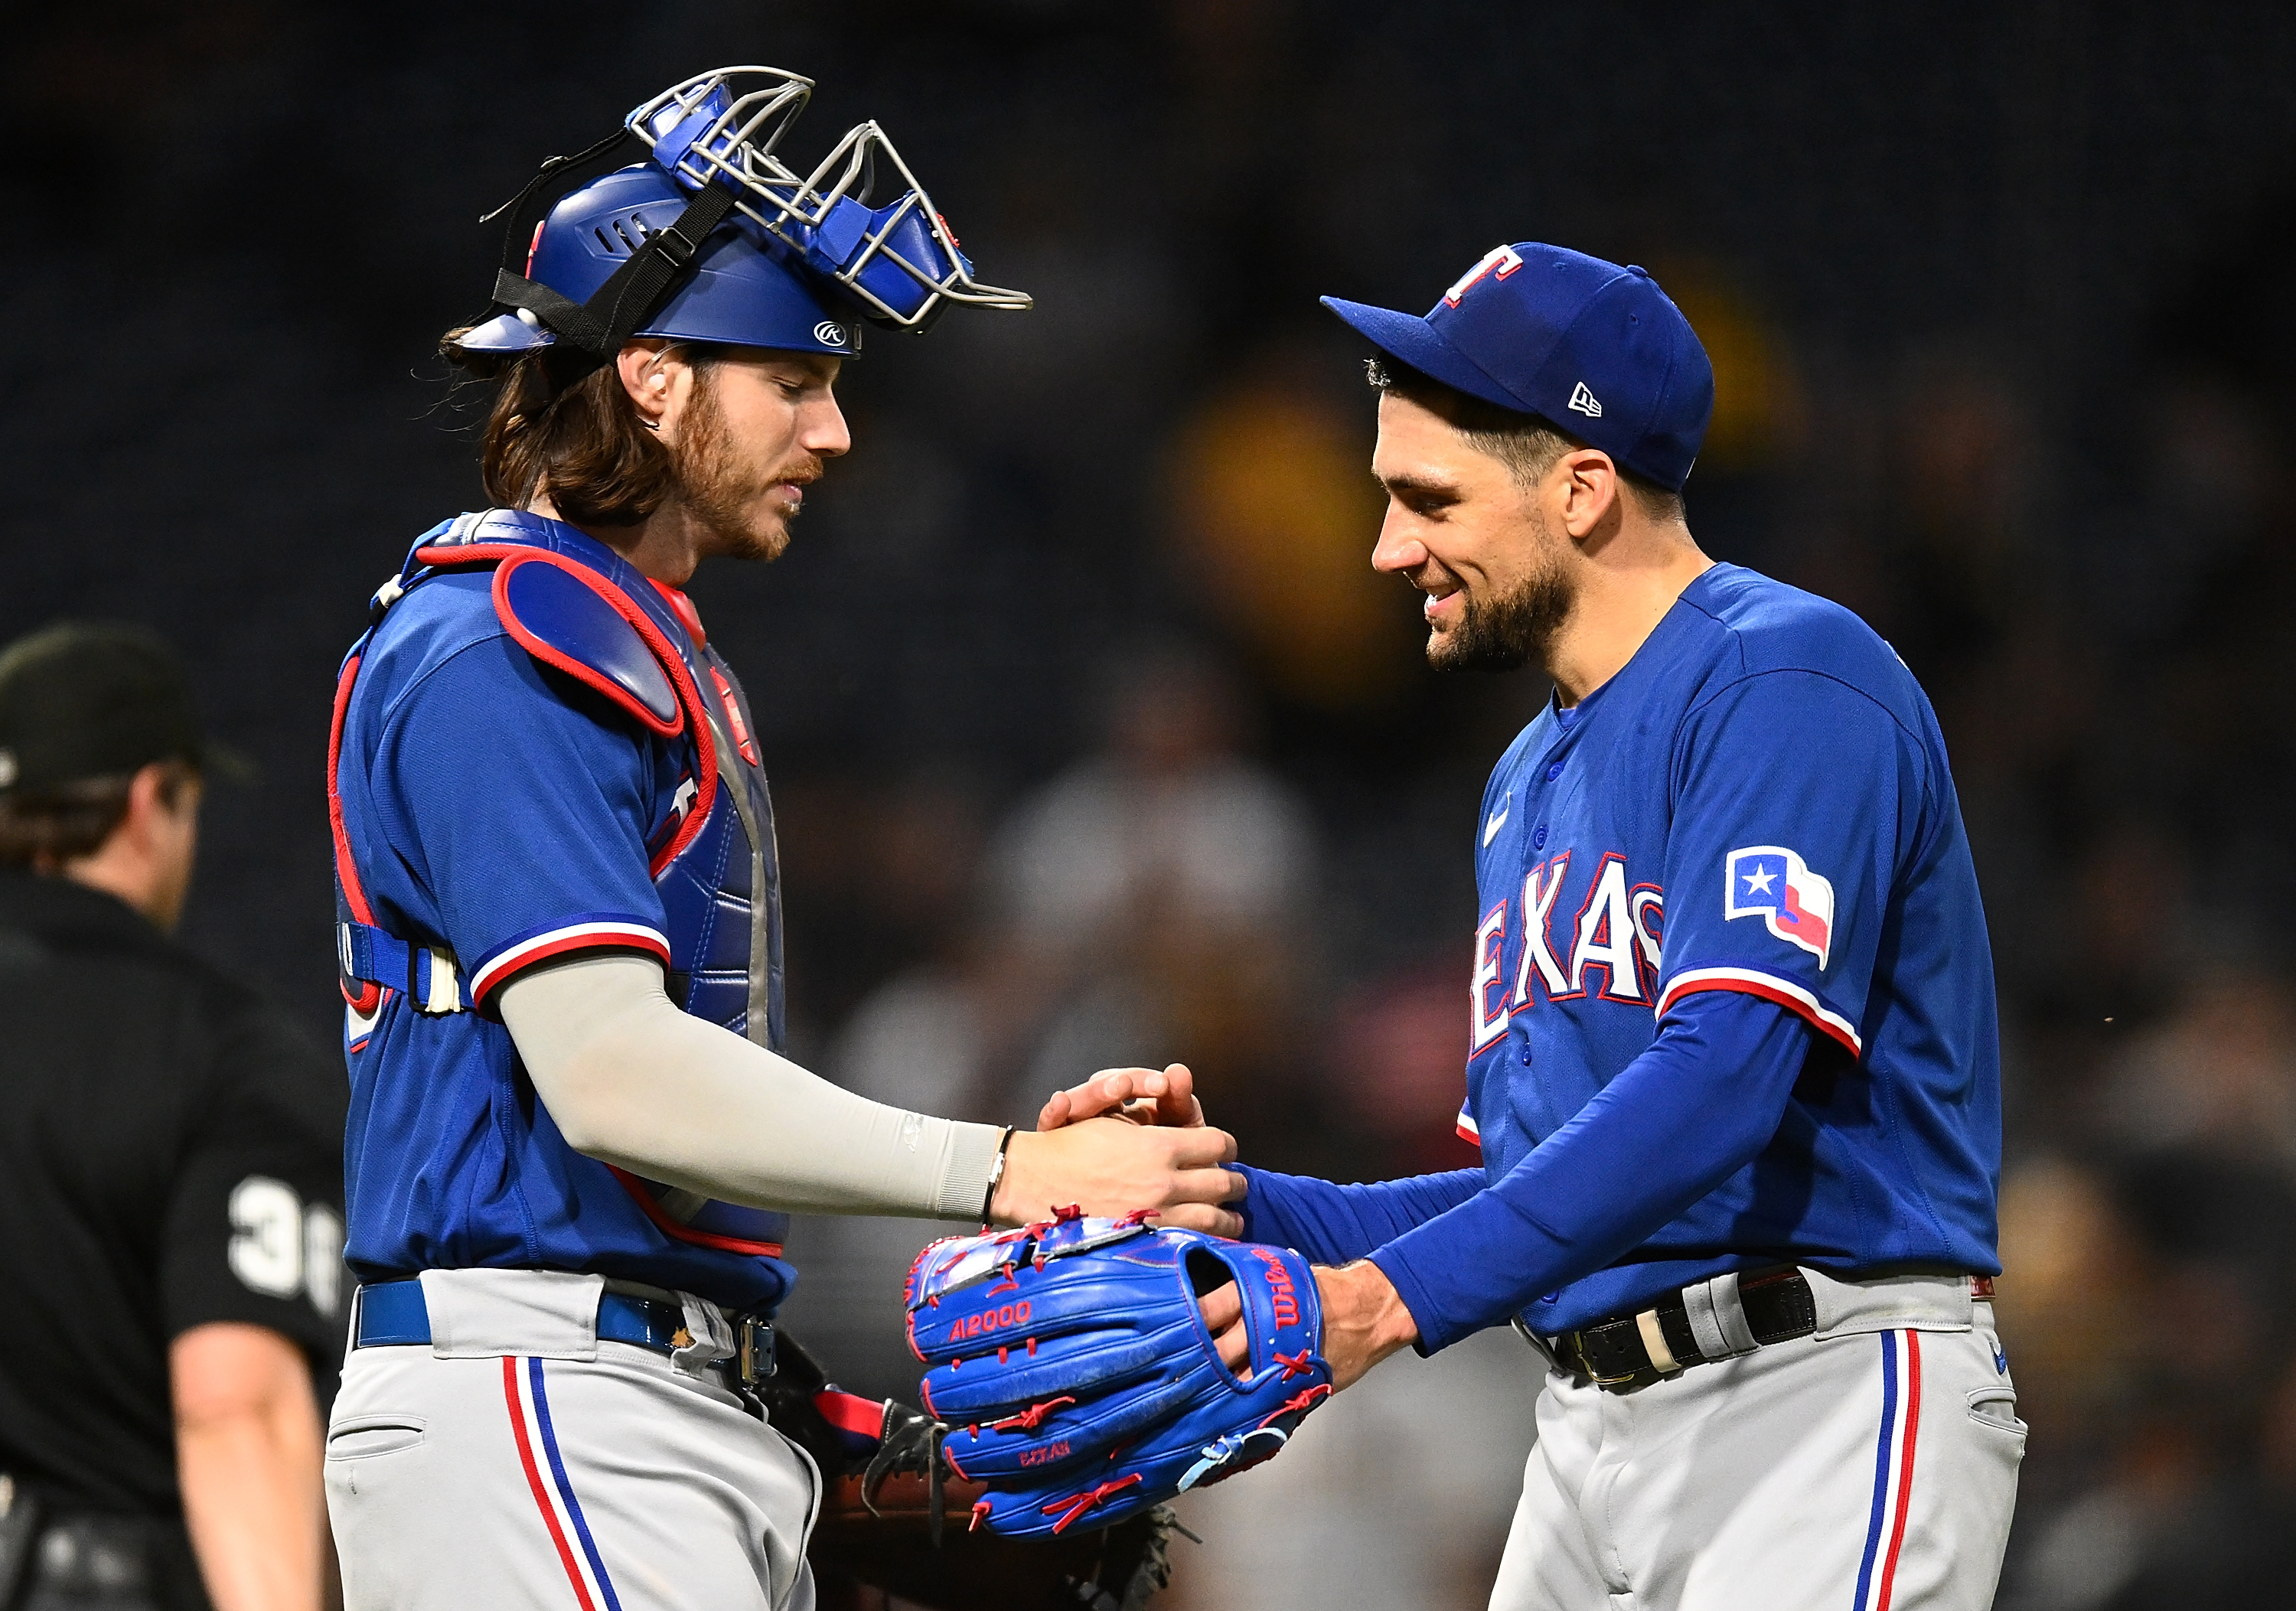 Tigers 7, Rangers 2: Cats persevere despite more injury woes - Bless You  Boys